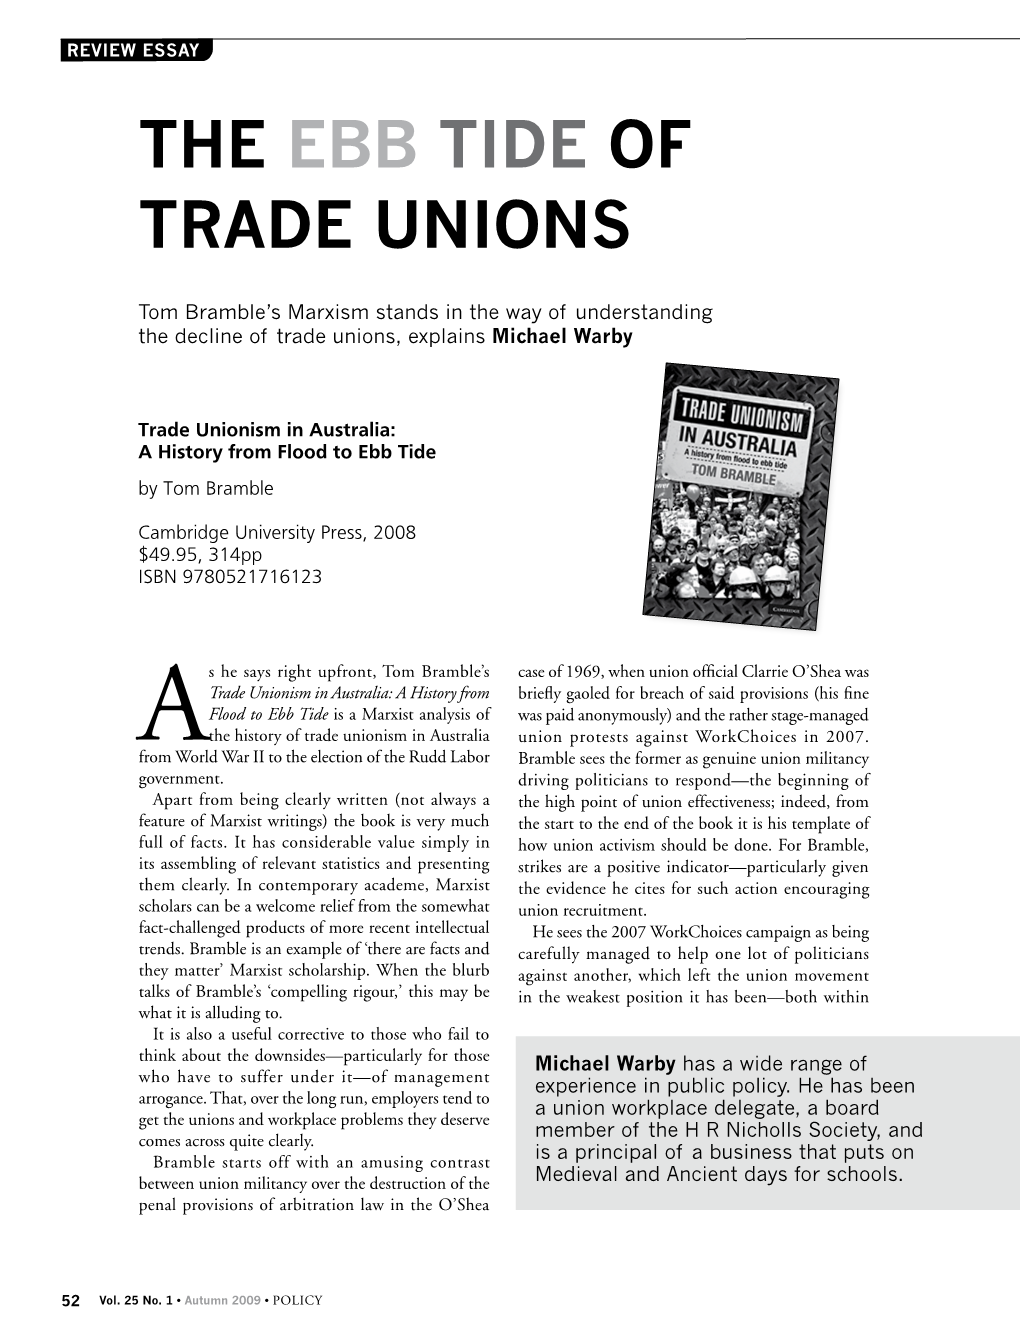 The Ebb Tide of Trade Unions